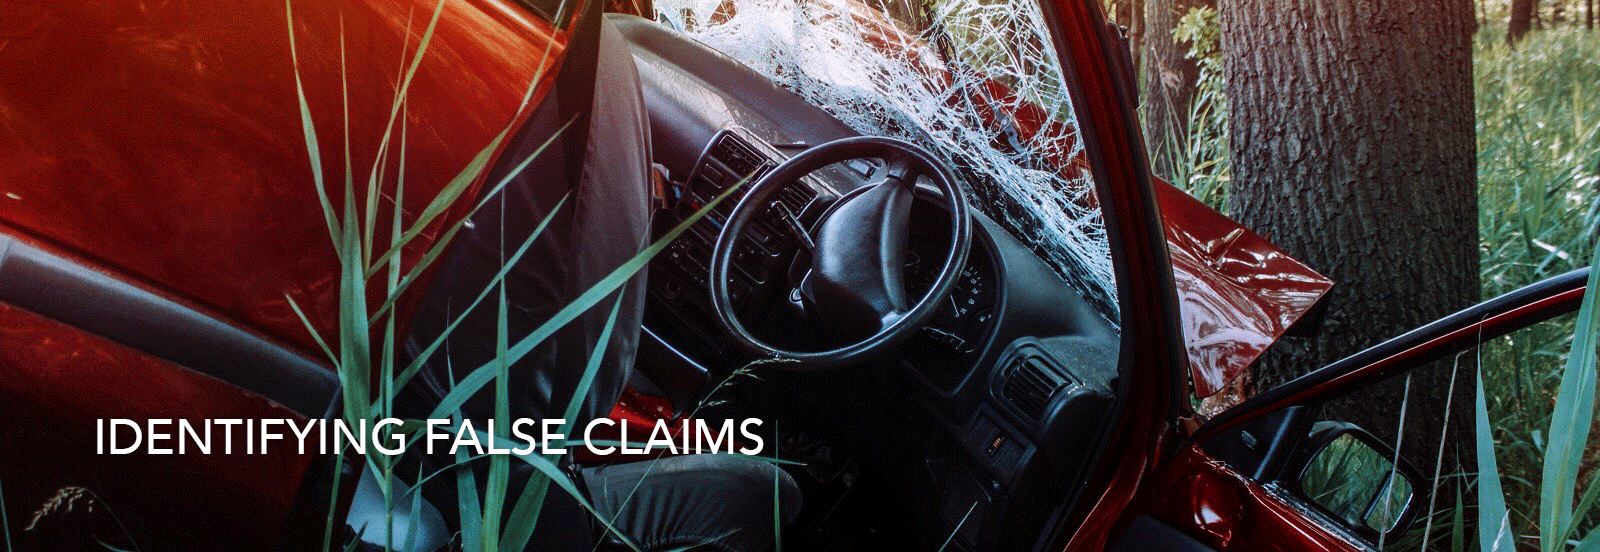 Reducing Payout on False Claims Saves Insurance Customers Millions in the long run